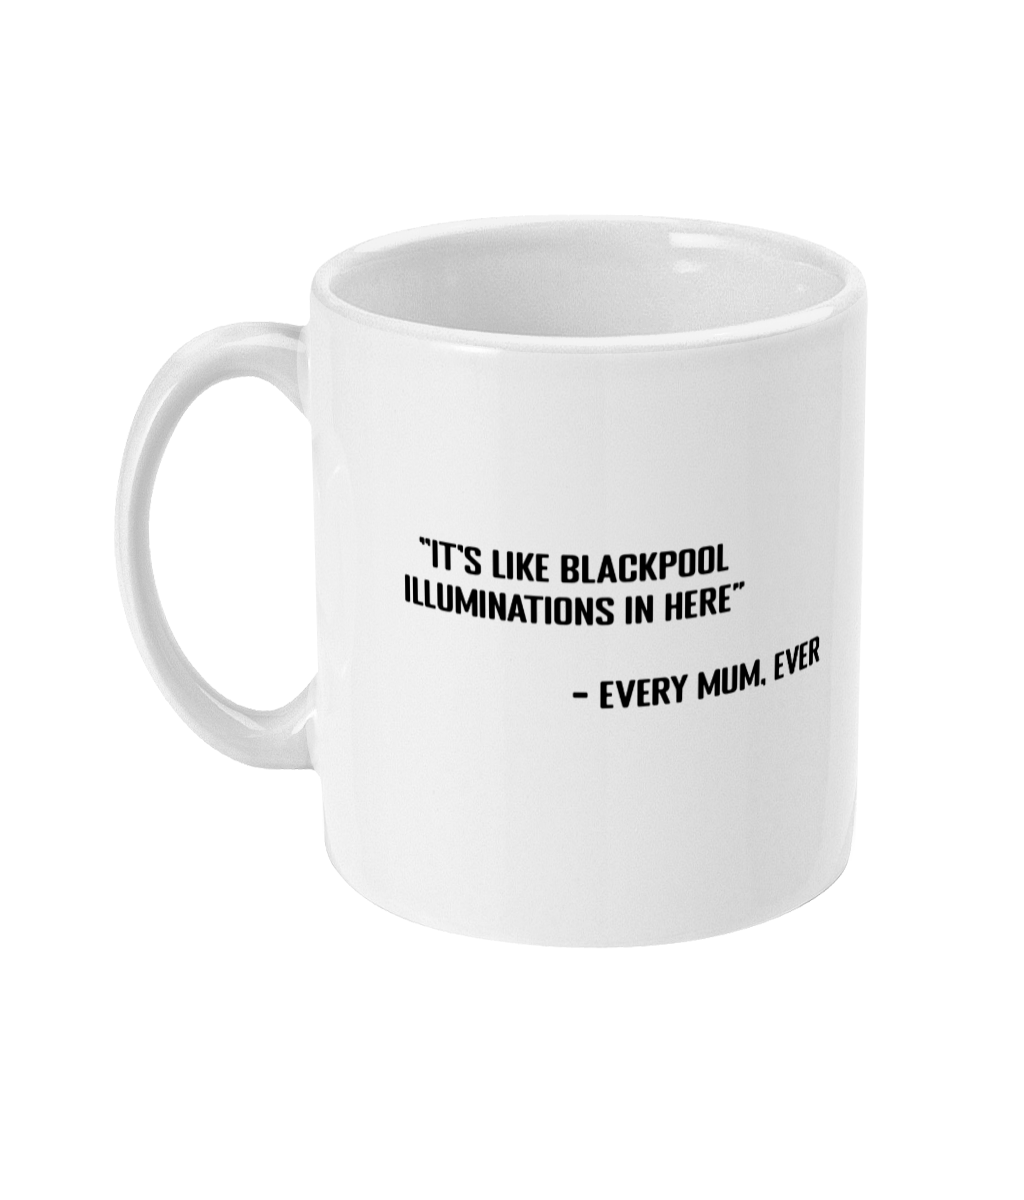 A glossy white 11oz mug with the statement 'it's like Blackpool illuminations in here - every mum, ever' printed on it's centre. The mug is placed on a white background.